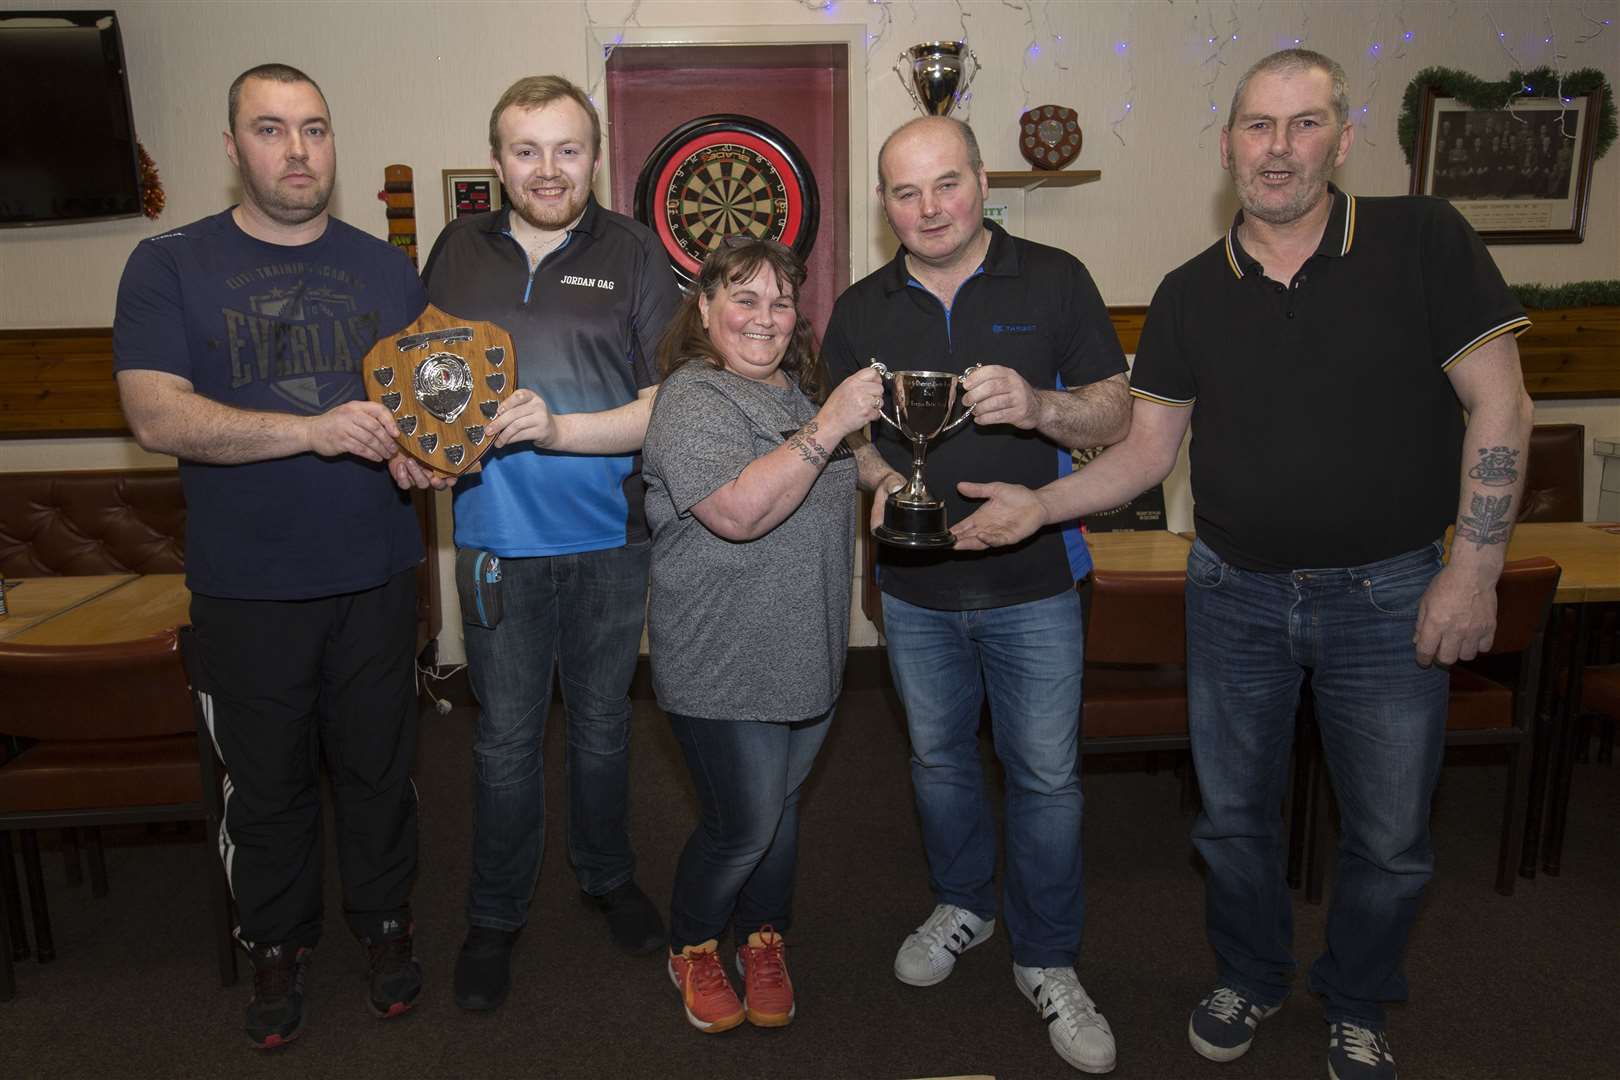 Wick and District Darts Leagues men's first division pairs champions David Taylor (right) and Alan Nicolson, of Harper's B, receive their trophy from Julie Harper. Looking on are second division champions Jordan Oag and Martin Campbell (left), of Smiddy 2. The competition was played in the Seaforth Highlanders' Club. Picture: Robert MacDonald / Northern Studios